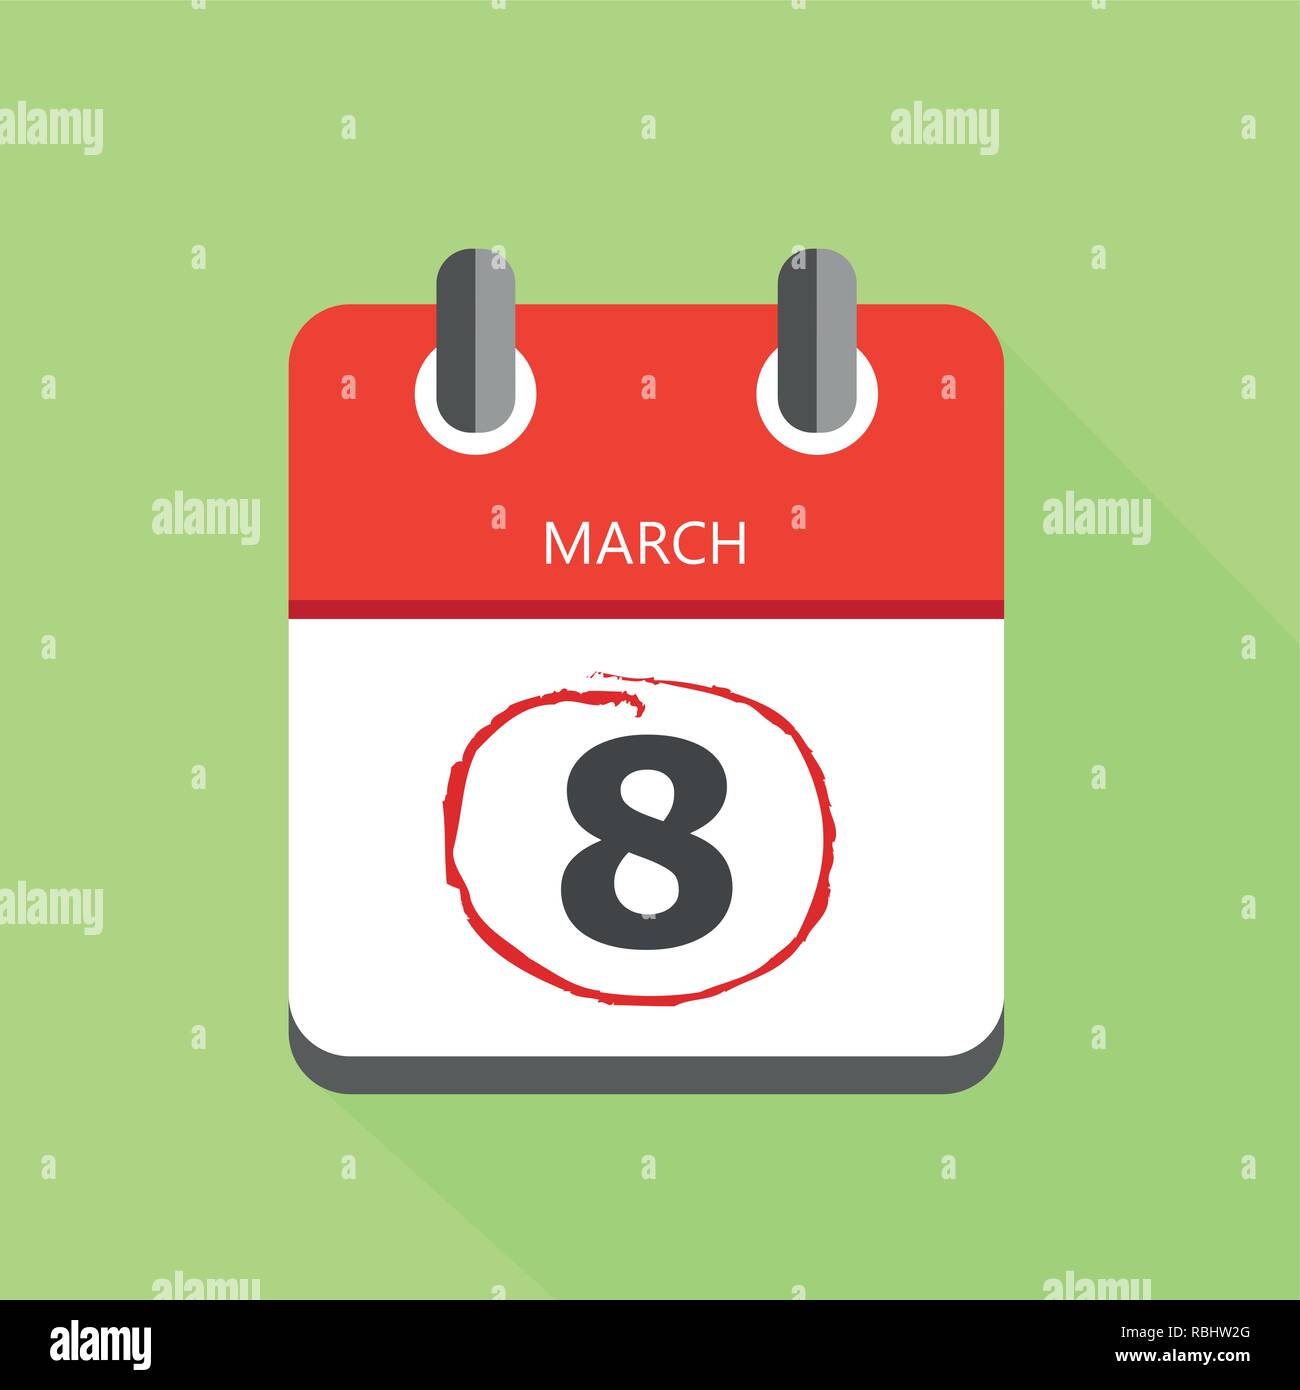 International womens day on 8th march calendar icon vector illustration EPS10 Stock Vector